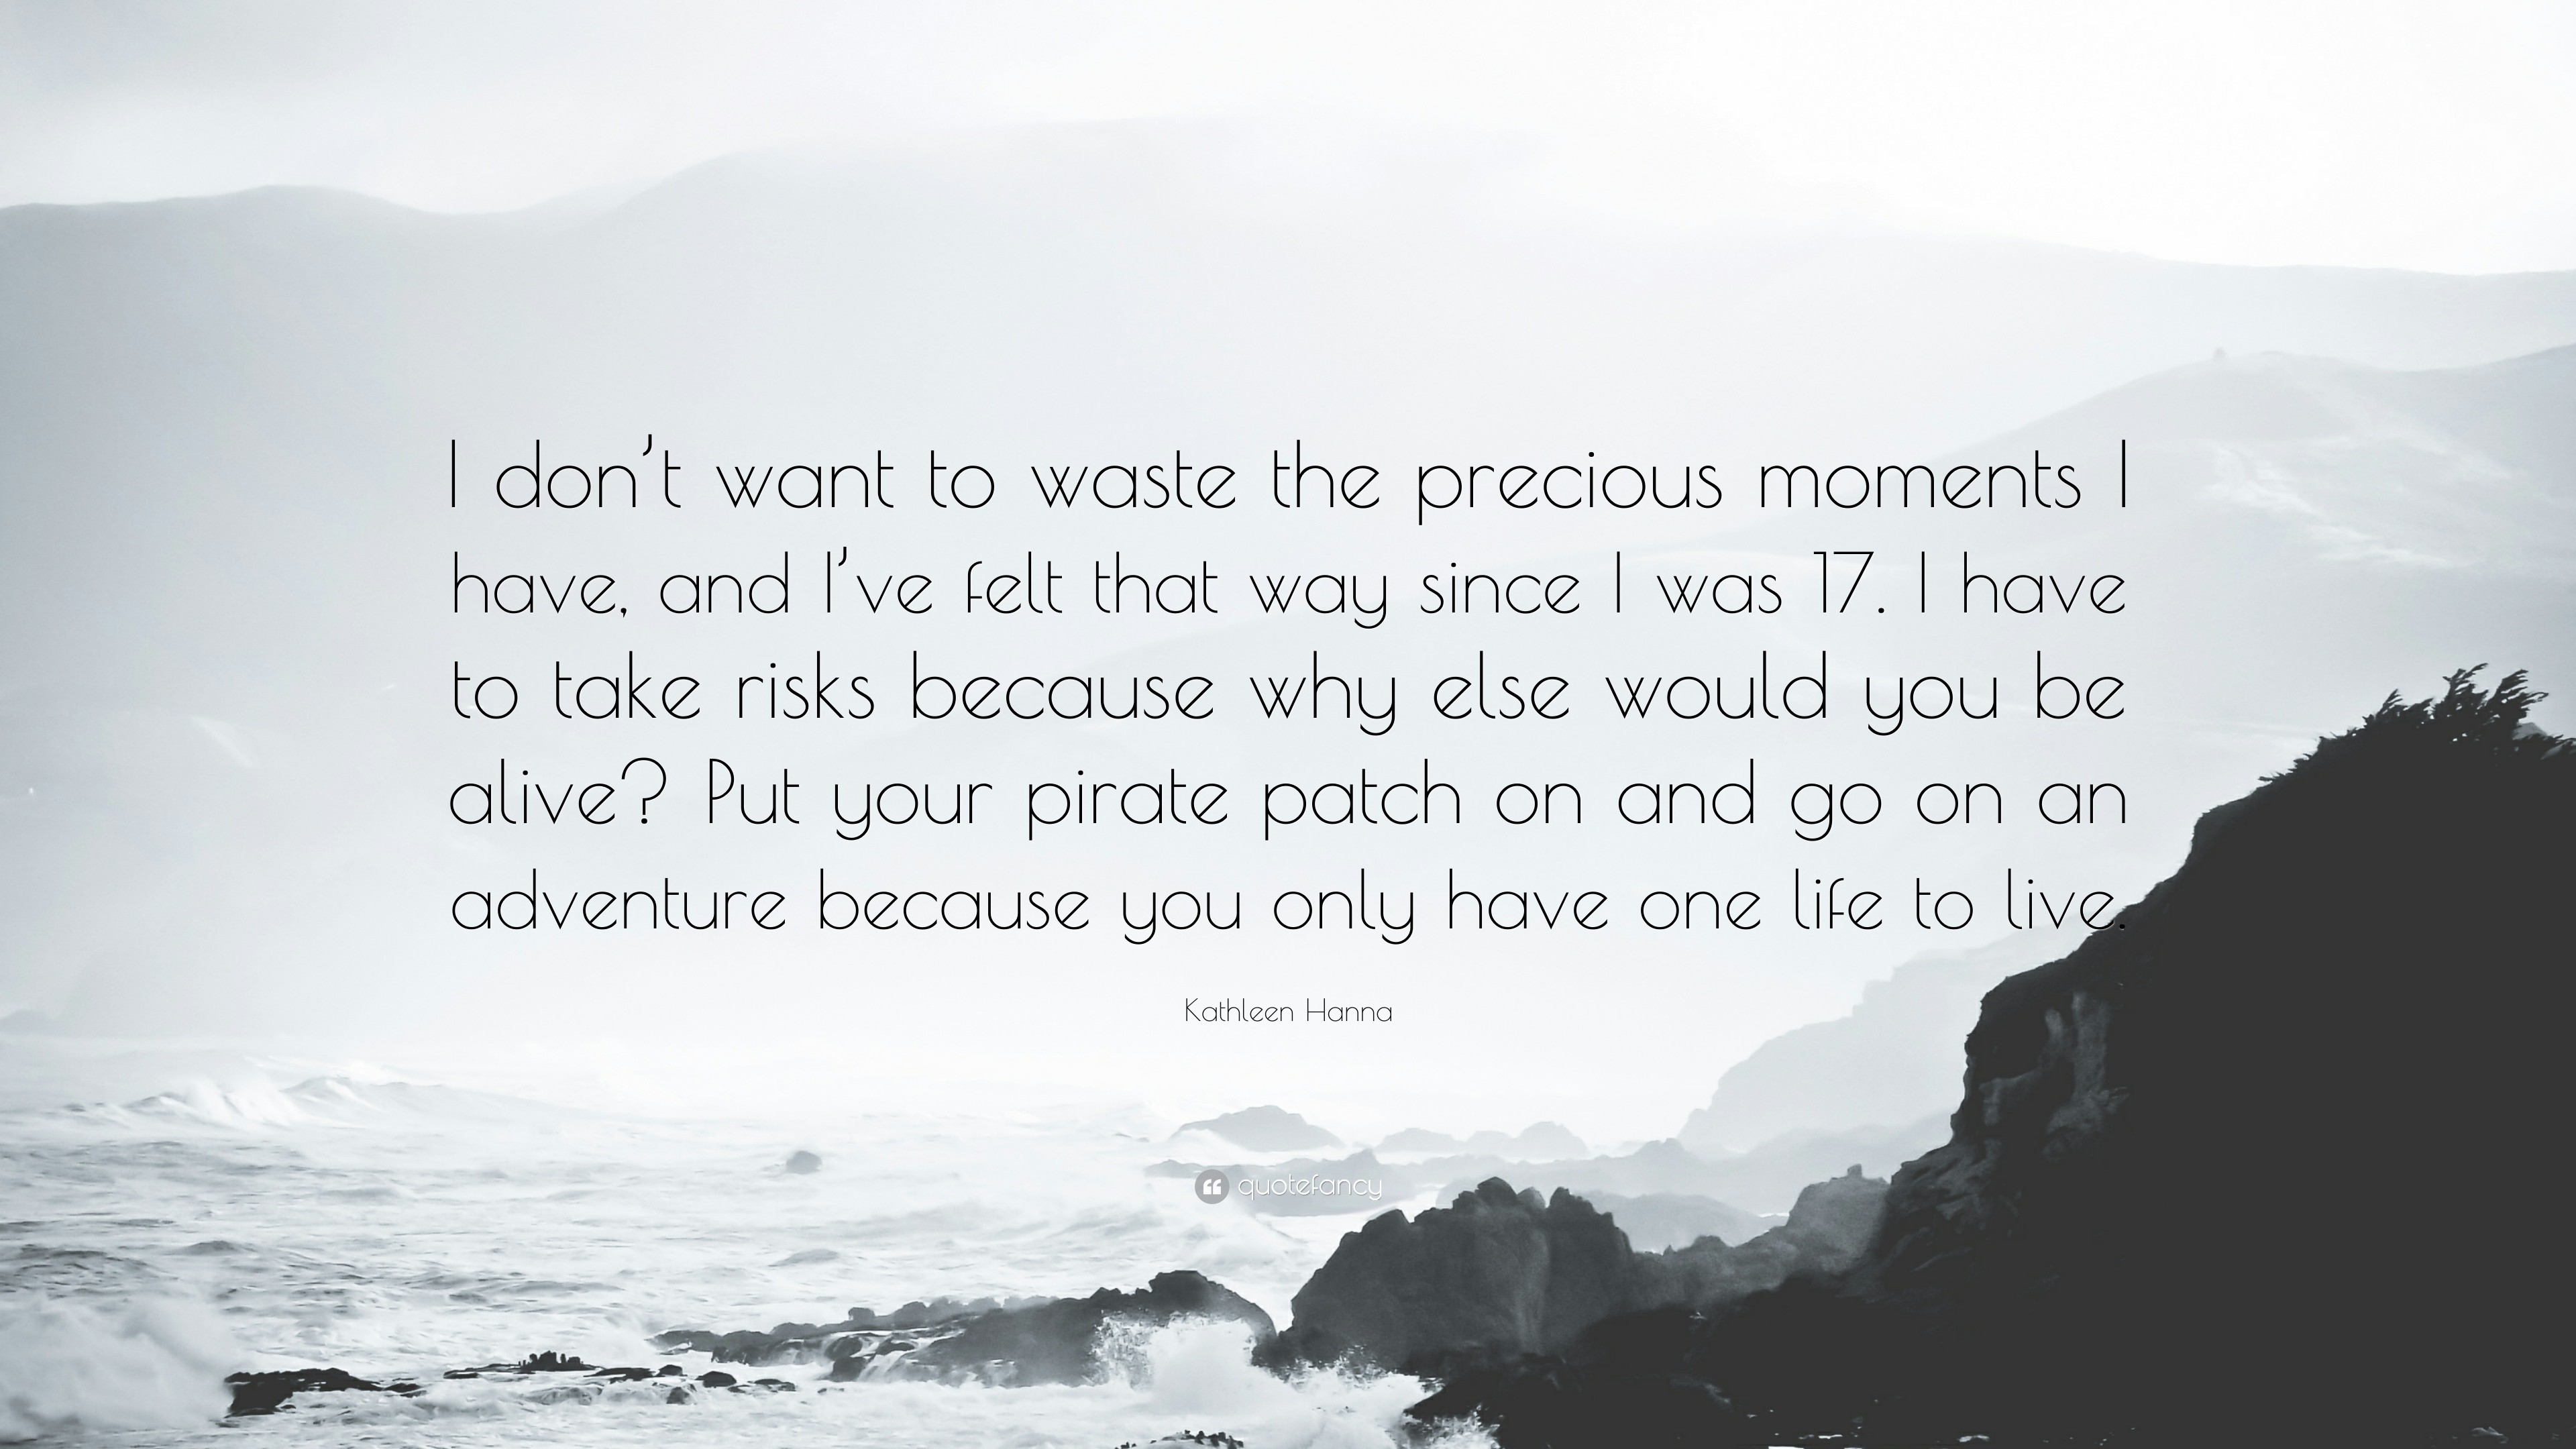 3840x2160 Kathleen Hanna Quote: “I don't want to waste the precious moments I